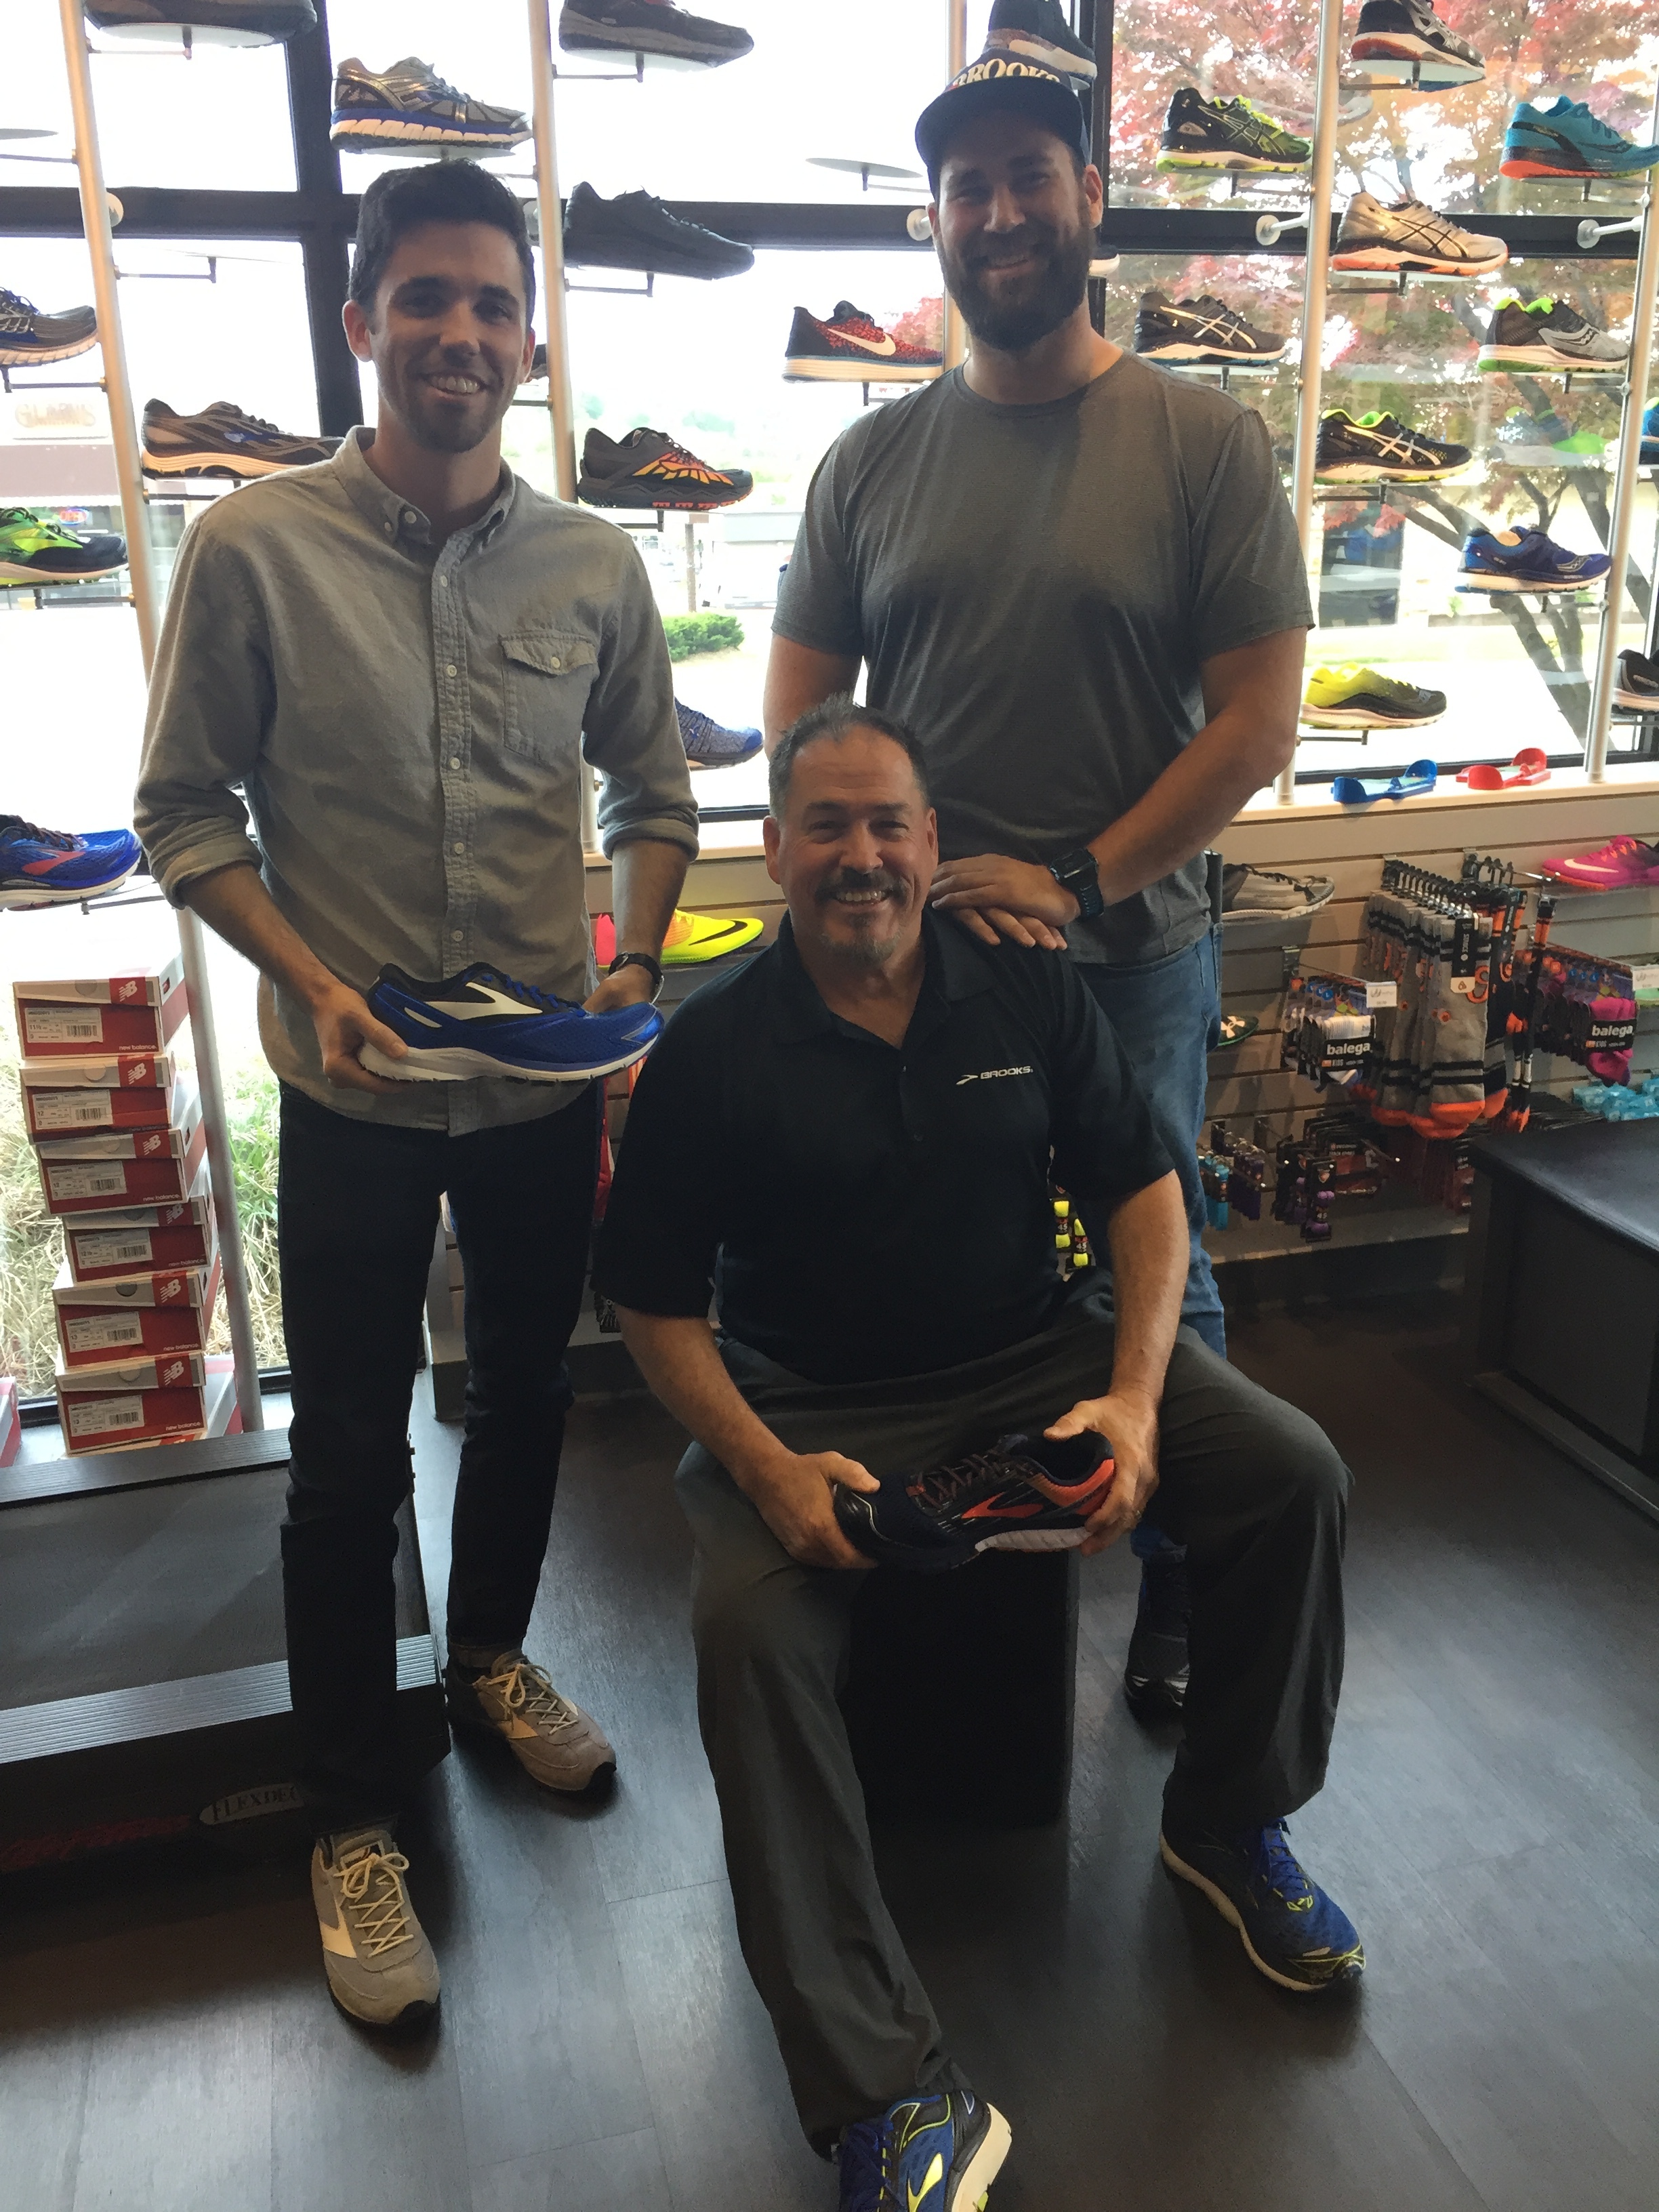 From right to left: Connor, Mike and Brennan with their favorite Brooks shoes!